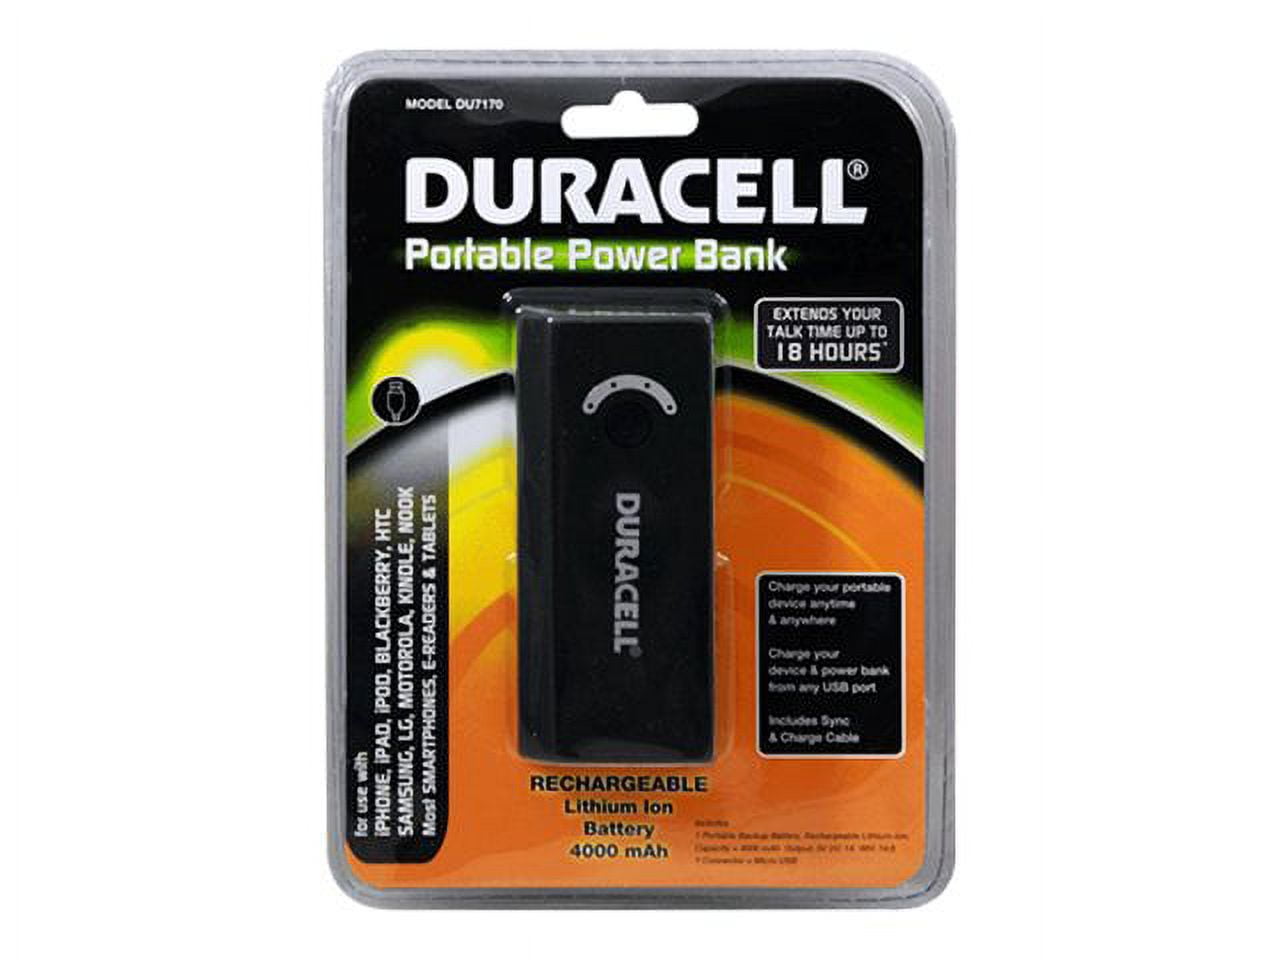 Duracell 10000 mAh Power Bank Unboxing Review